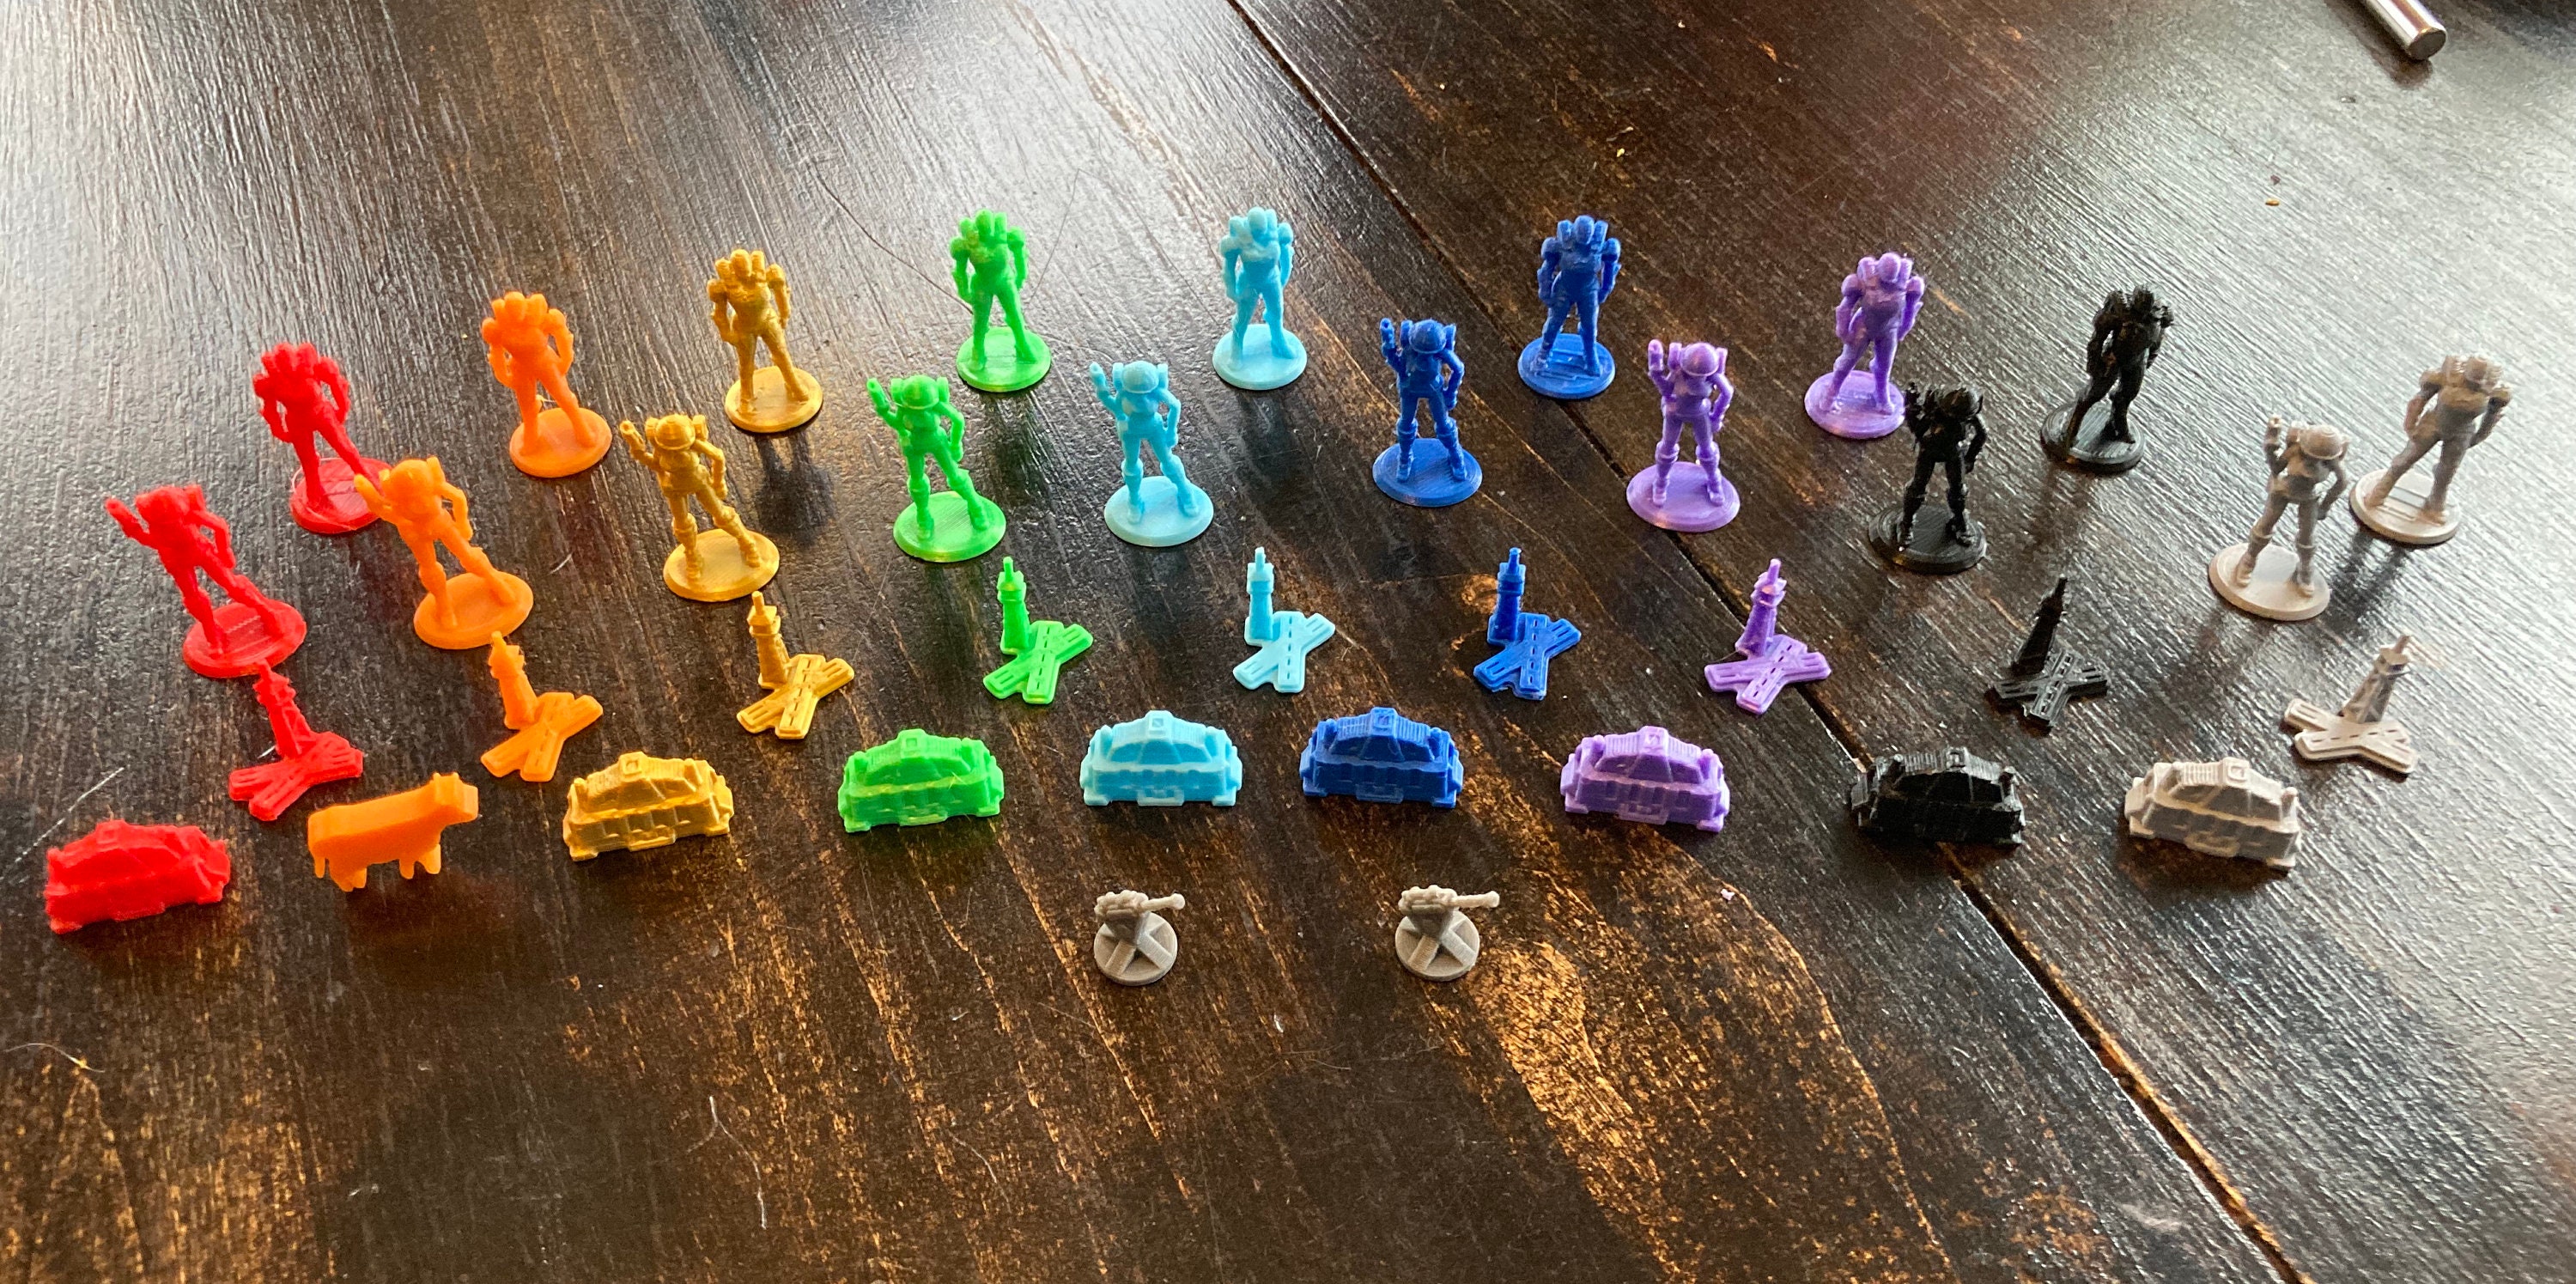 New Commander Miniatures for RISK 2210 and Other Tabletop foto